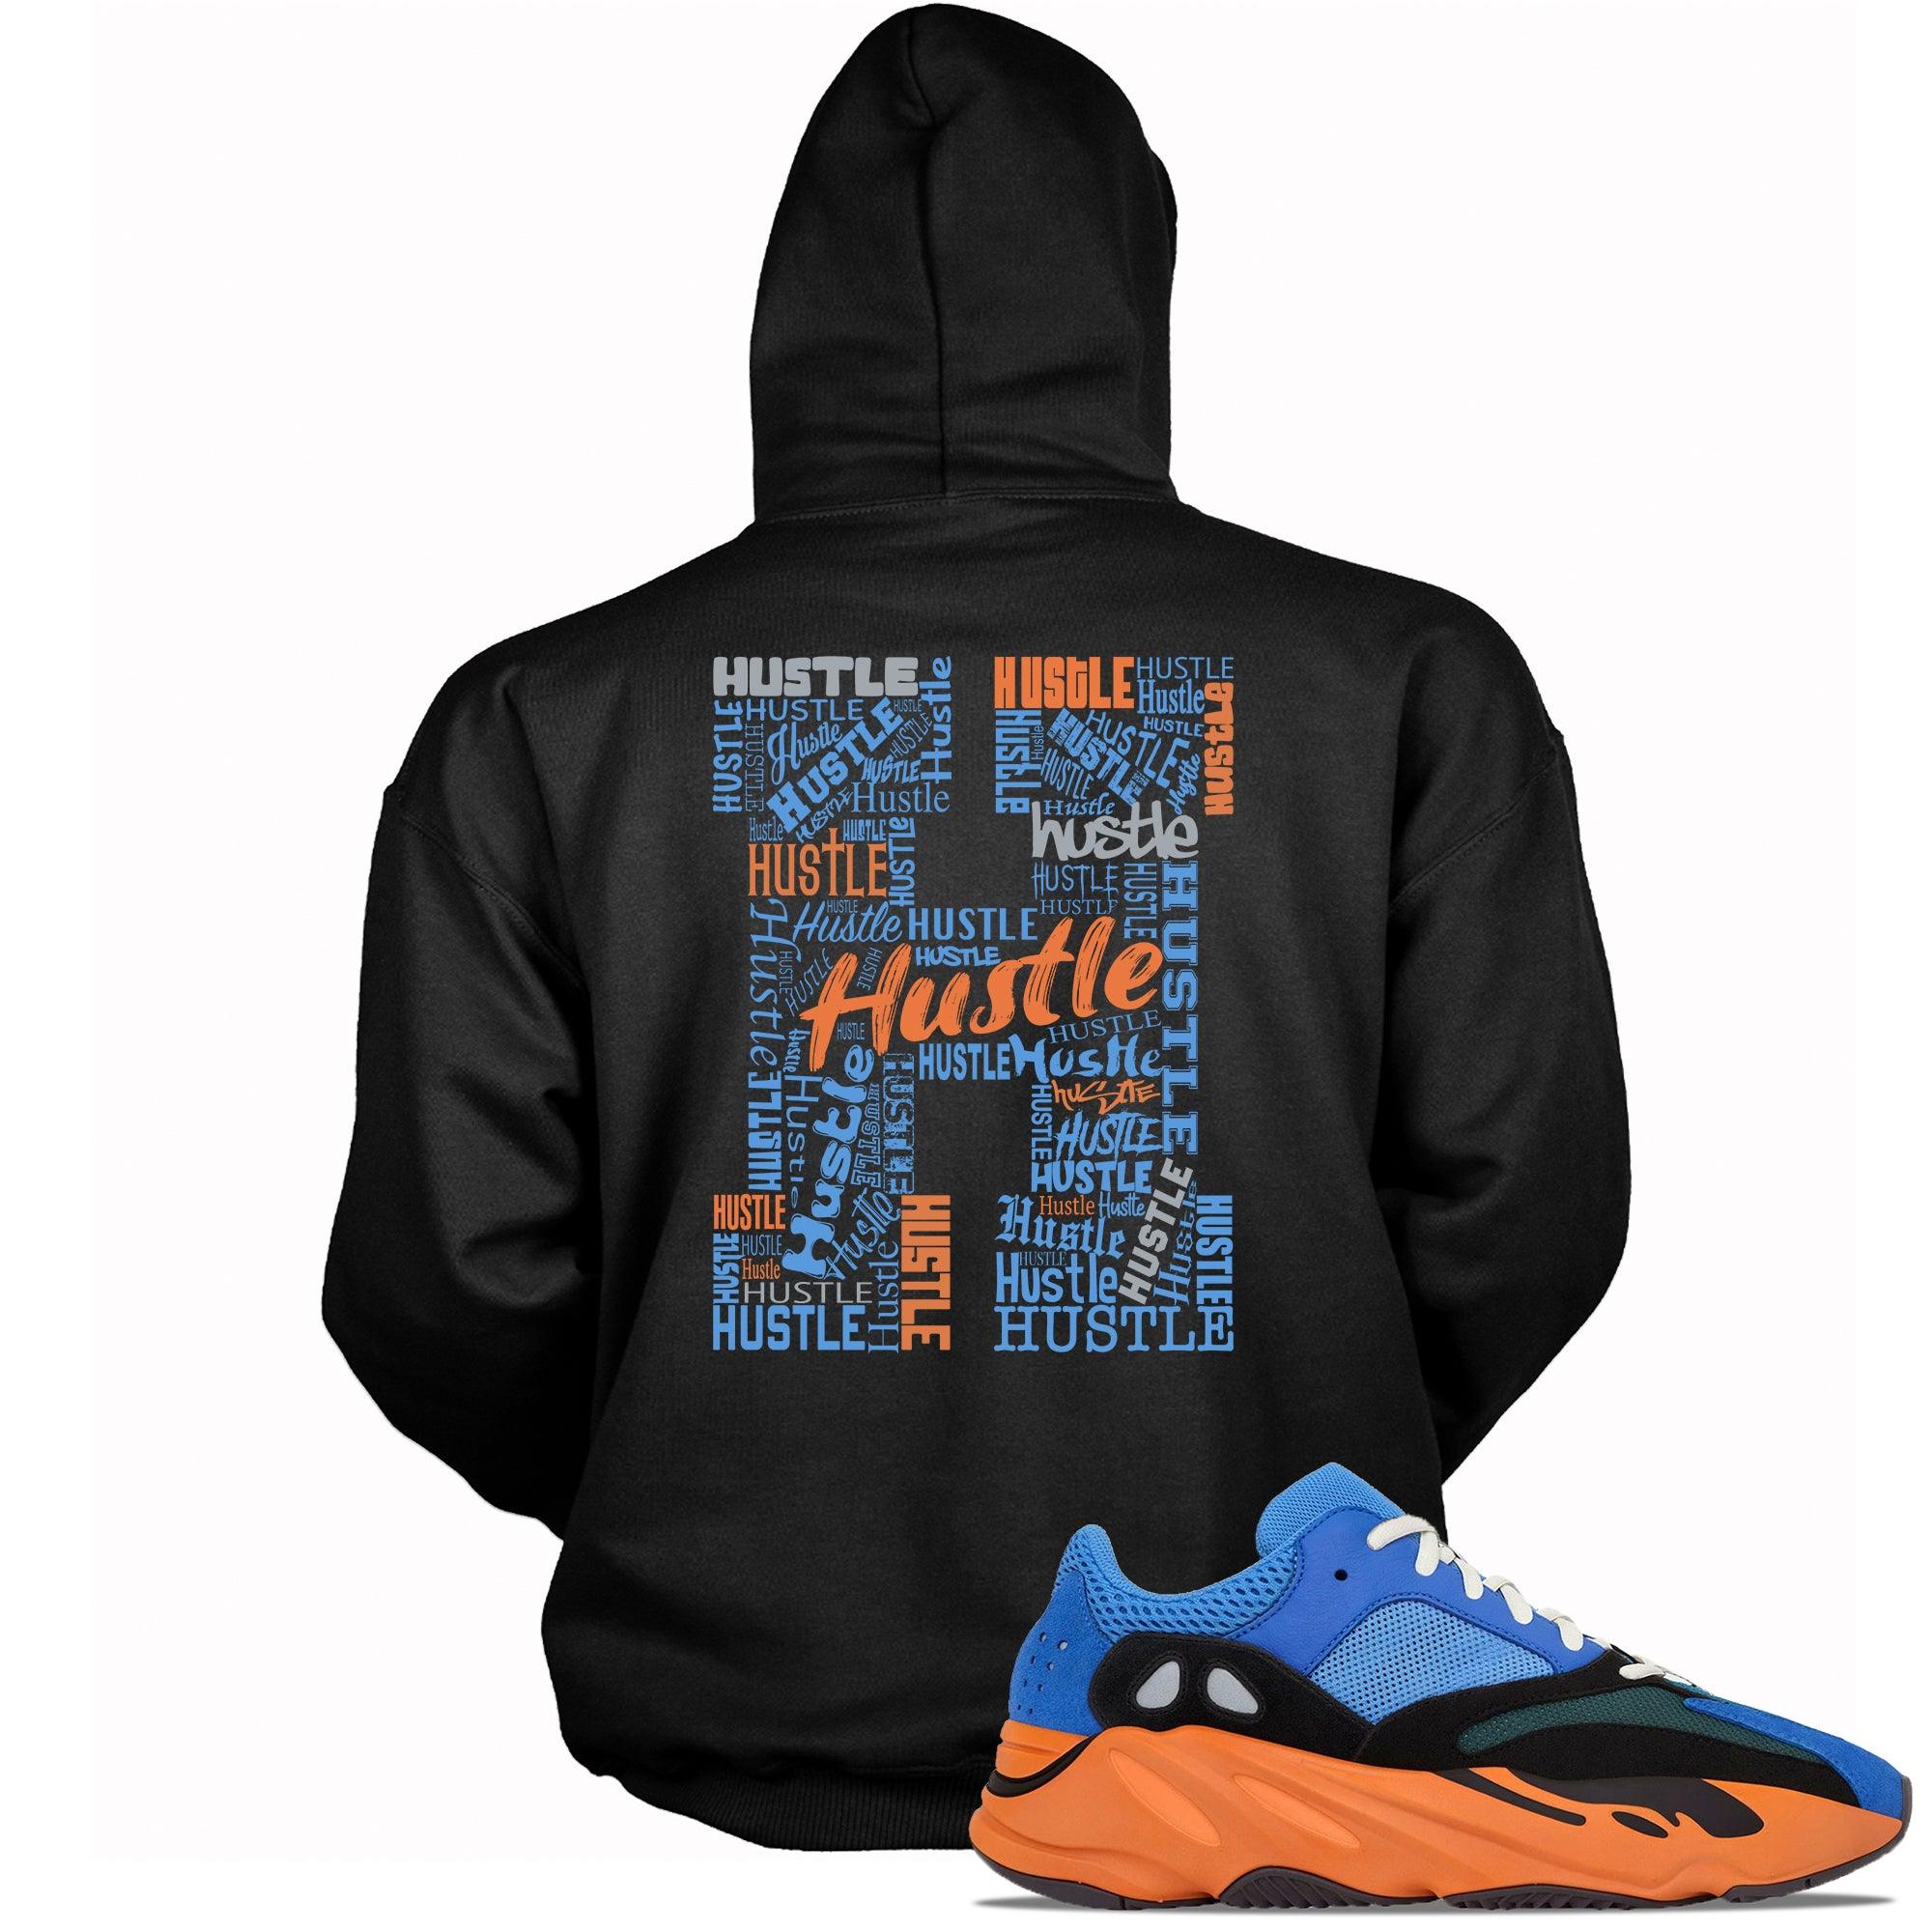 Black H For Hustle Hoodie Yeezy Boost 700 Bright Blue photo